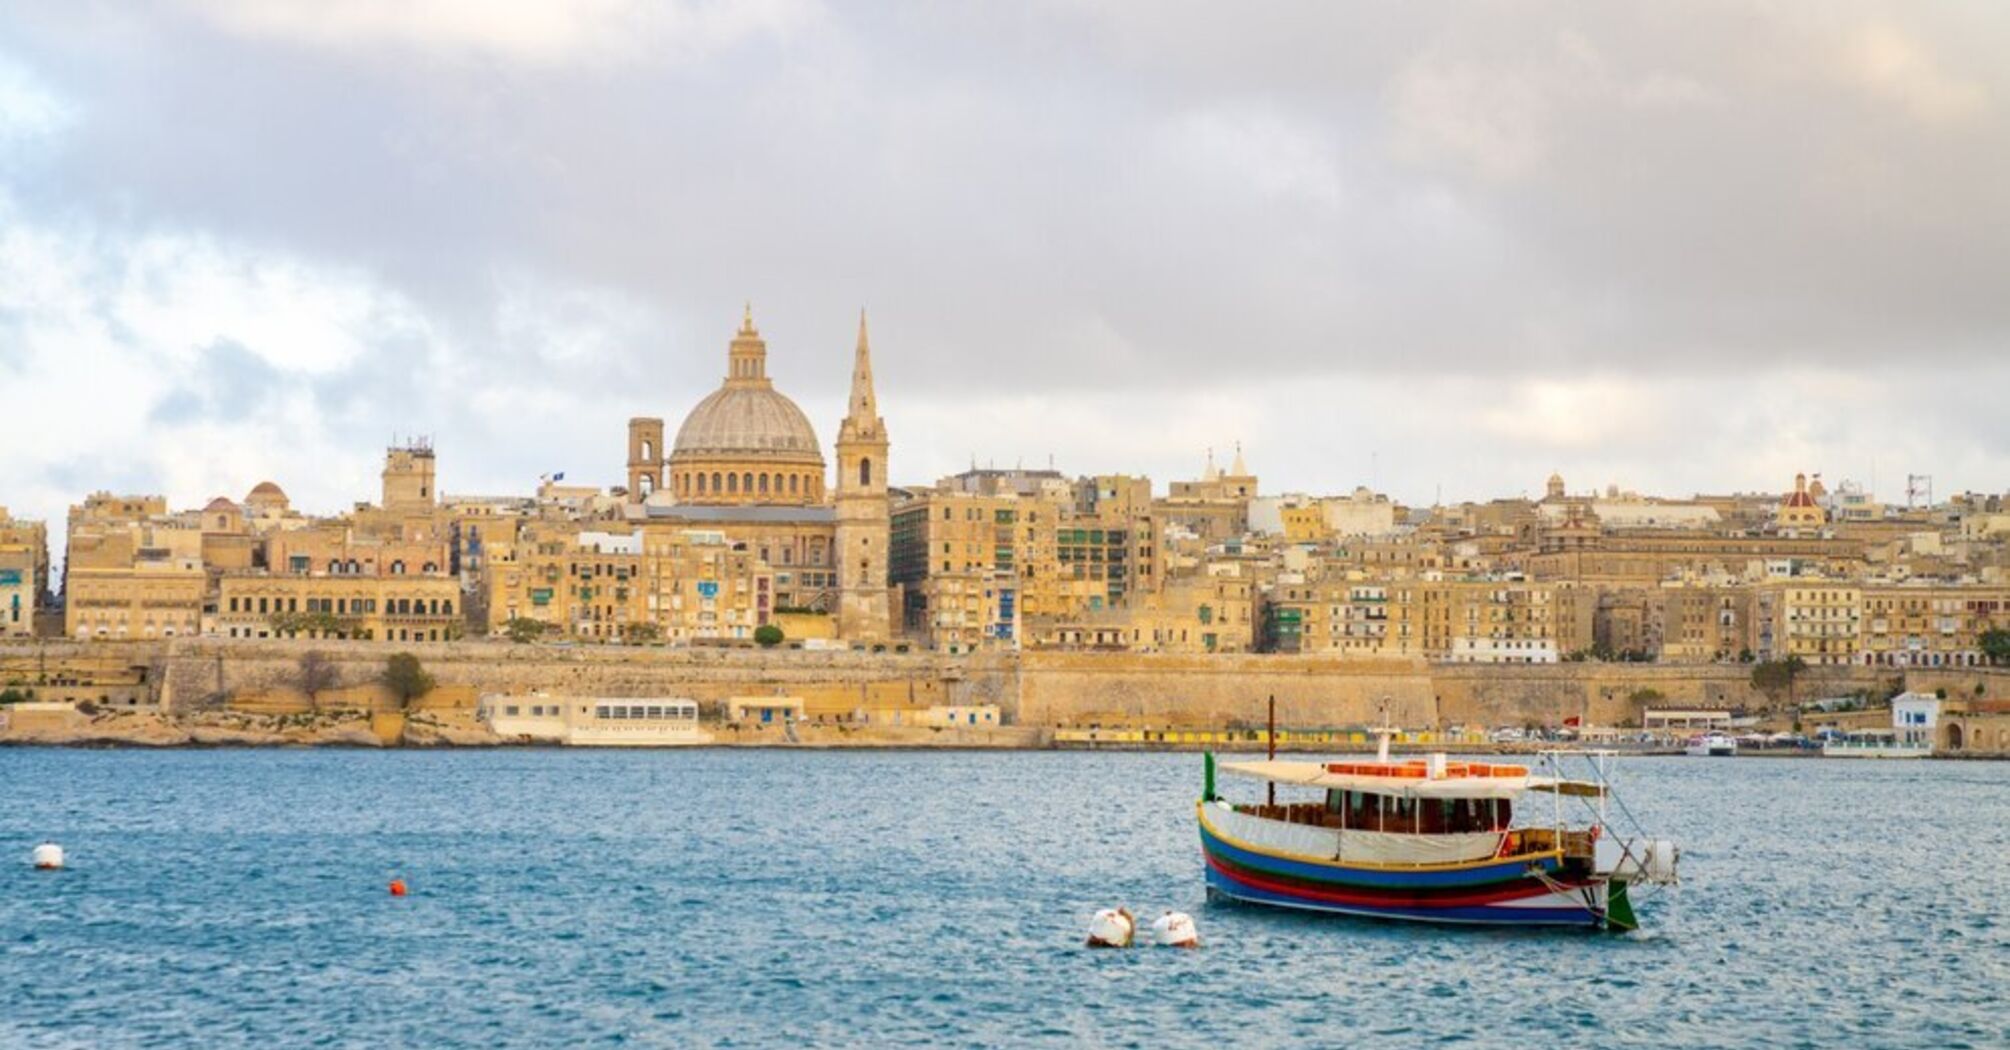 Old prison and a secret passage in the cathedral: unusual things to see in Malta